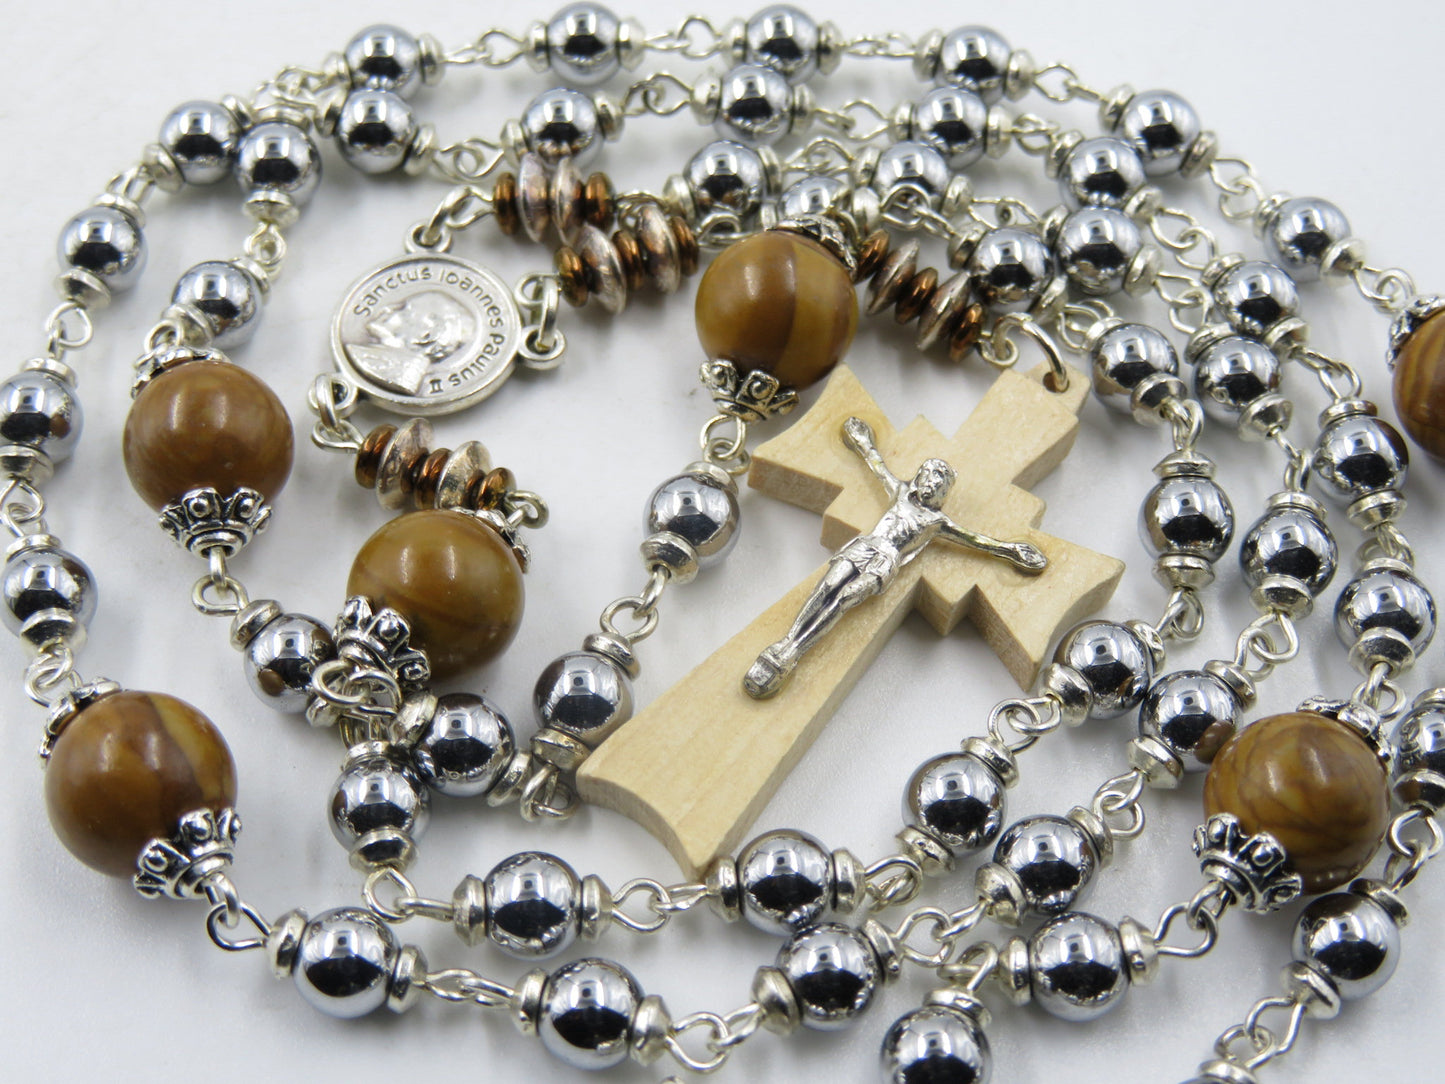 Unique Heirloom Silver Hematite Rosary beads, St John Paul II beads. Olive wood Crucifix, Boy's Rosary beads, Confirmation gift.